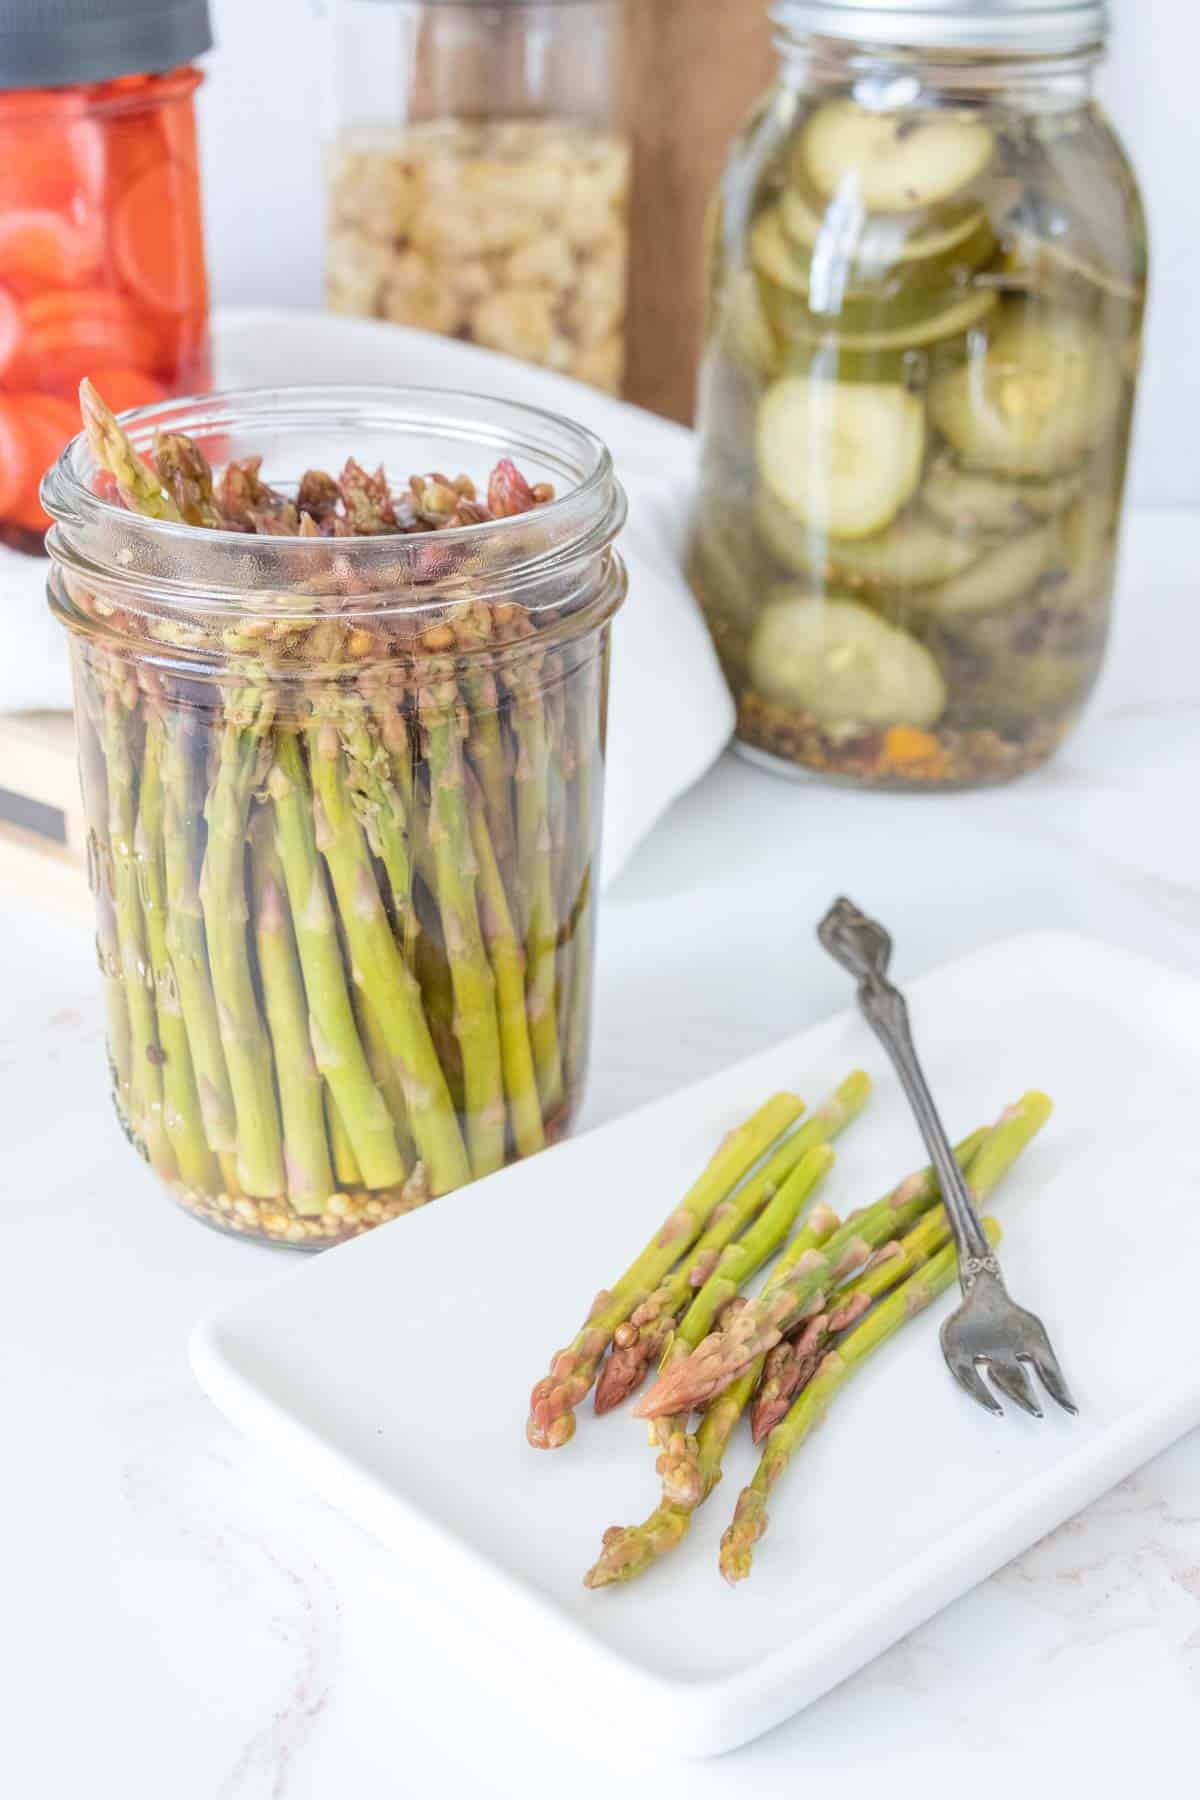 Jar of pickled asparagus with some pickles on a plate and more pickle jars behind.